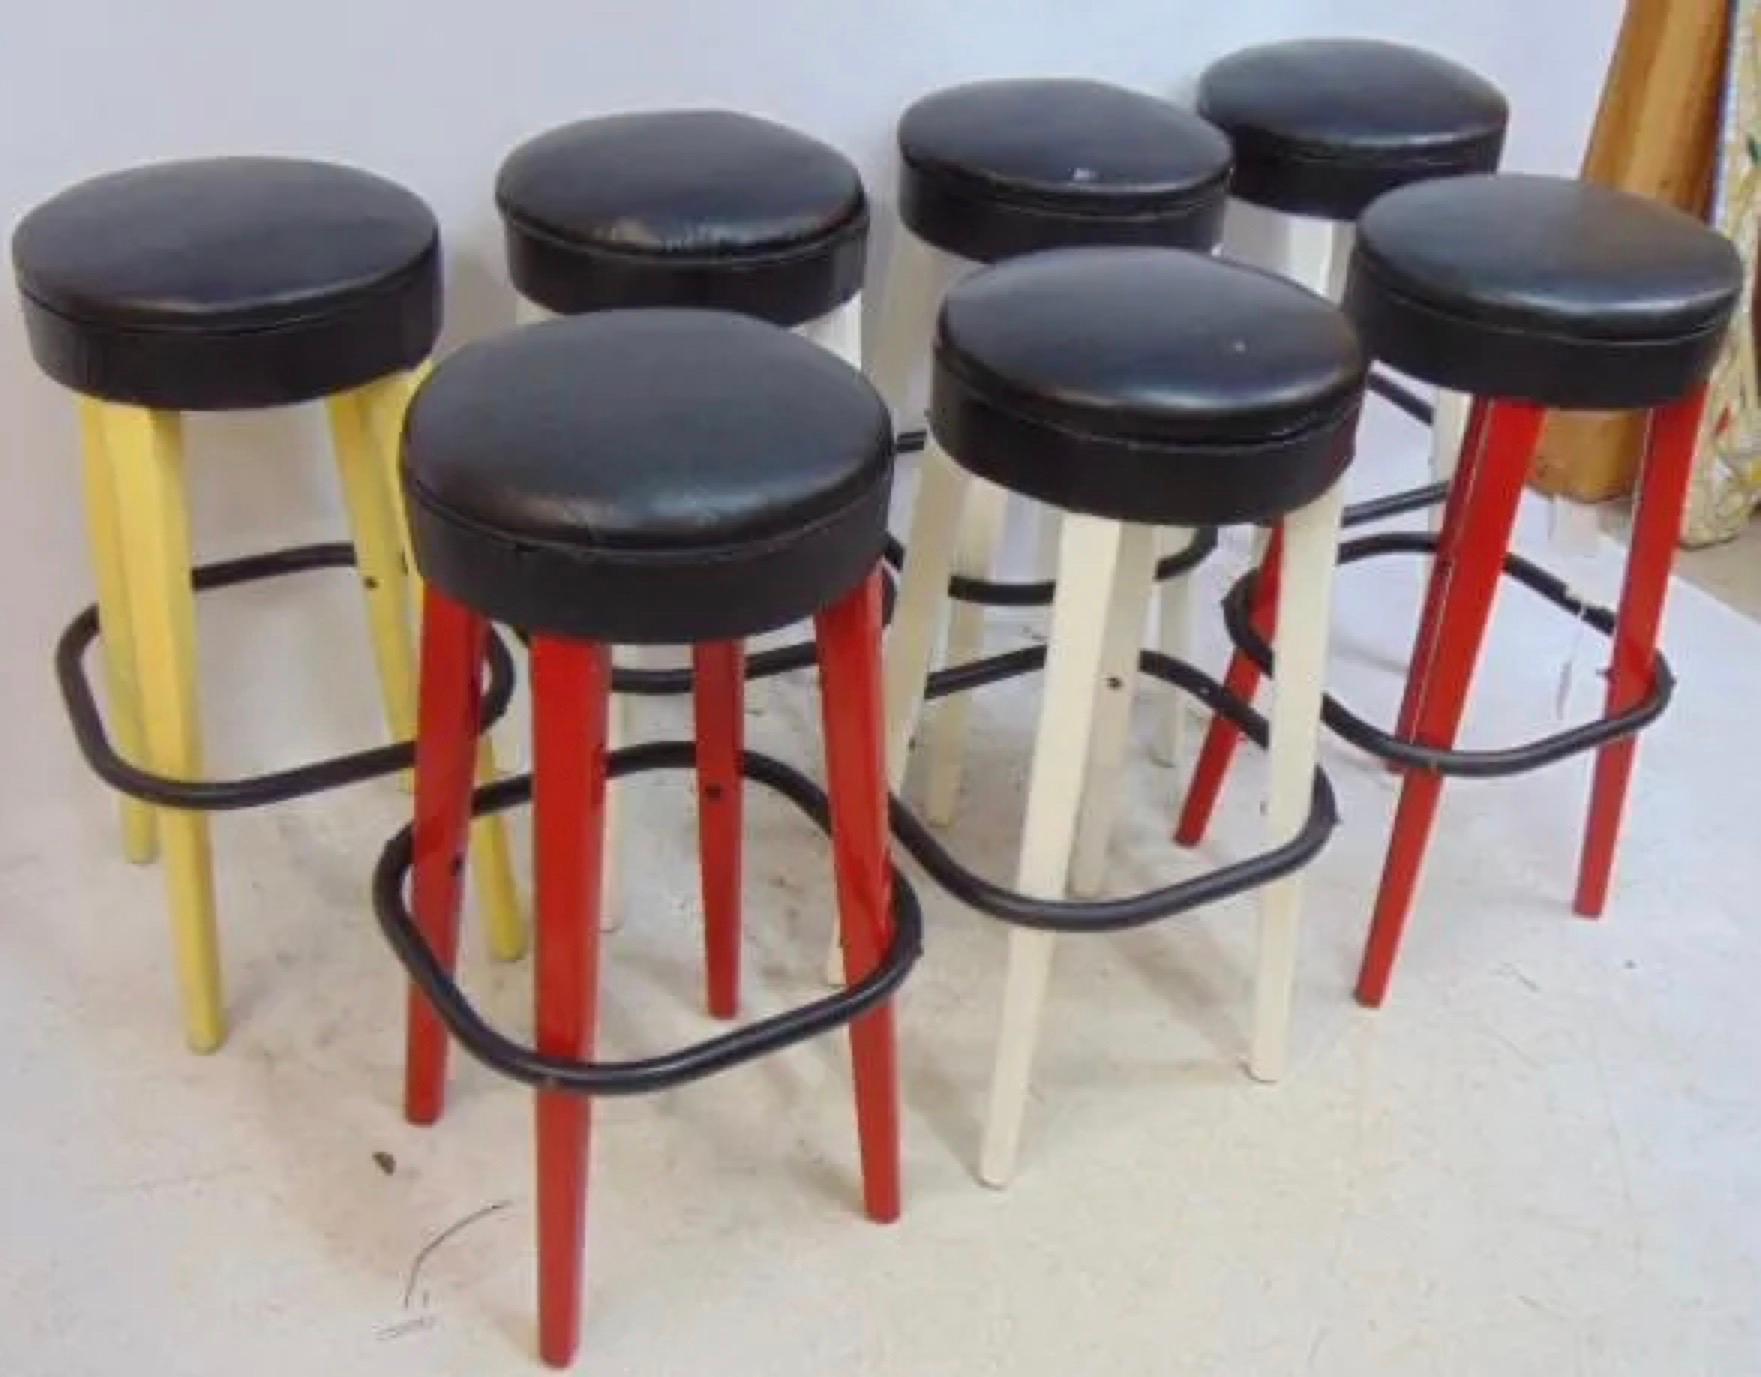 An authentic collection of 3 of 7 still remaining iconic Thonet stools from the 1930s, marked on the underside with Thonet Logo and certificate.  2 red, 1 yellow painted wooden base with chrome foot support and black vinyl seats. Paint is not